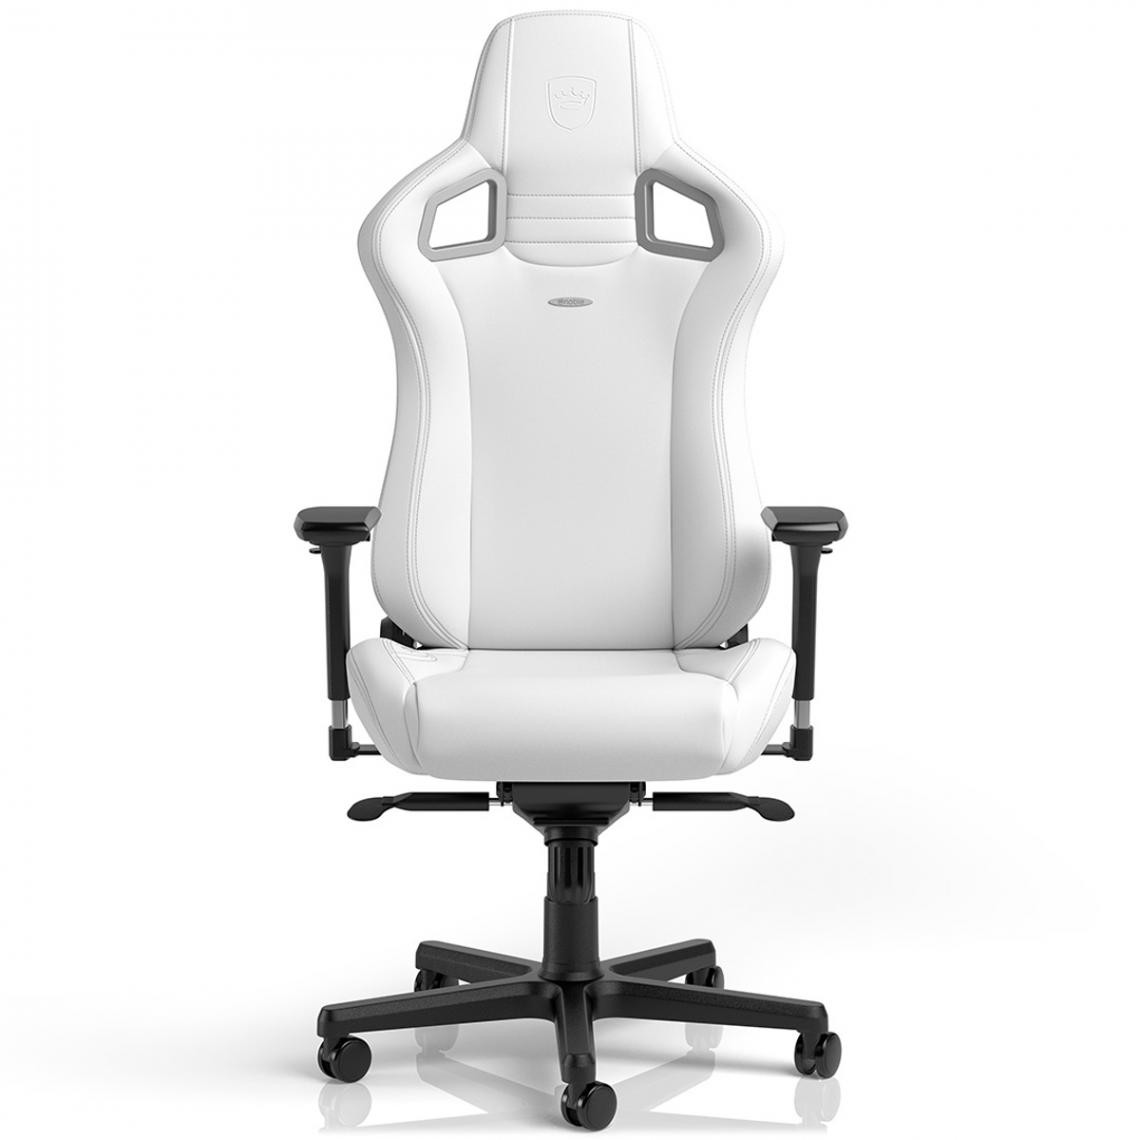 Noblechairs - Noblechairs EPIC Compact gaming - Blanche - Chaise gamer